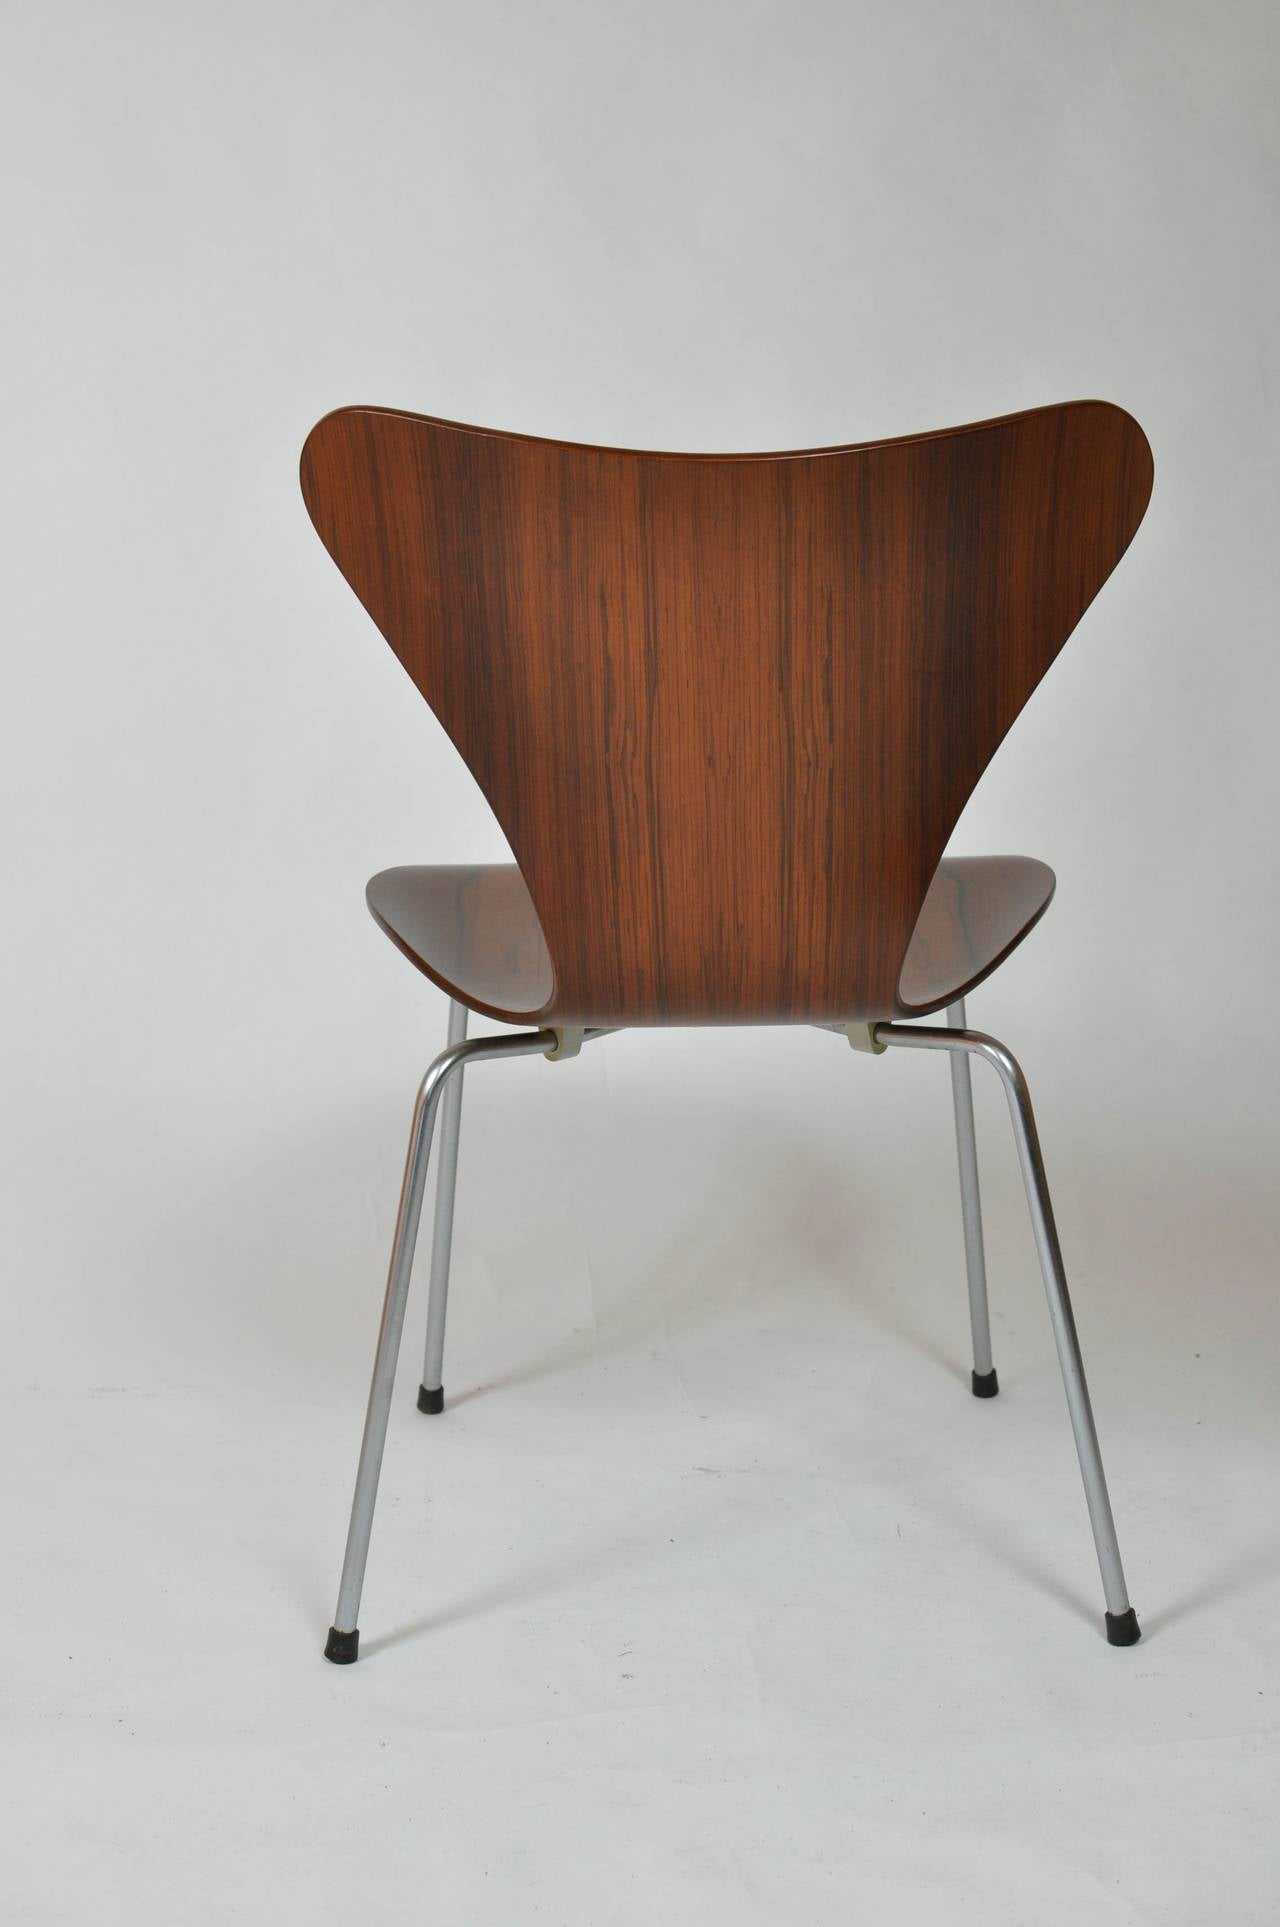 Plated Set of Ten Arne Jacobsen Rosewood Series Seven Chairs